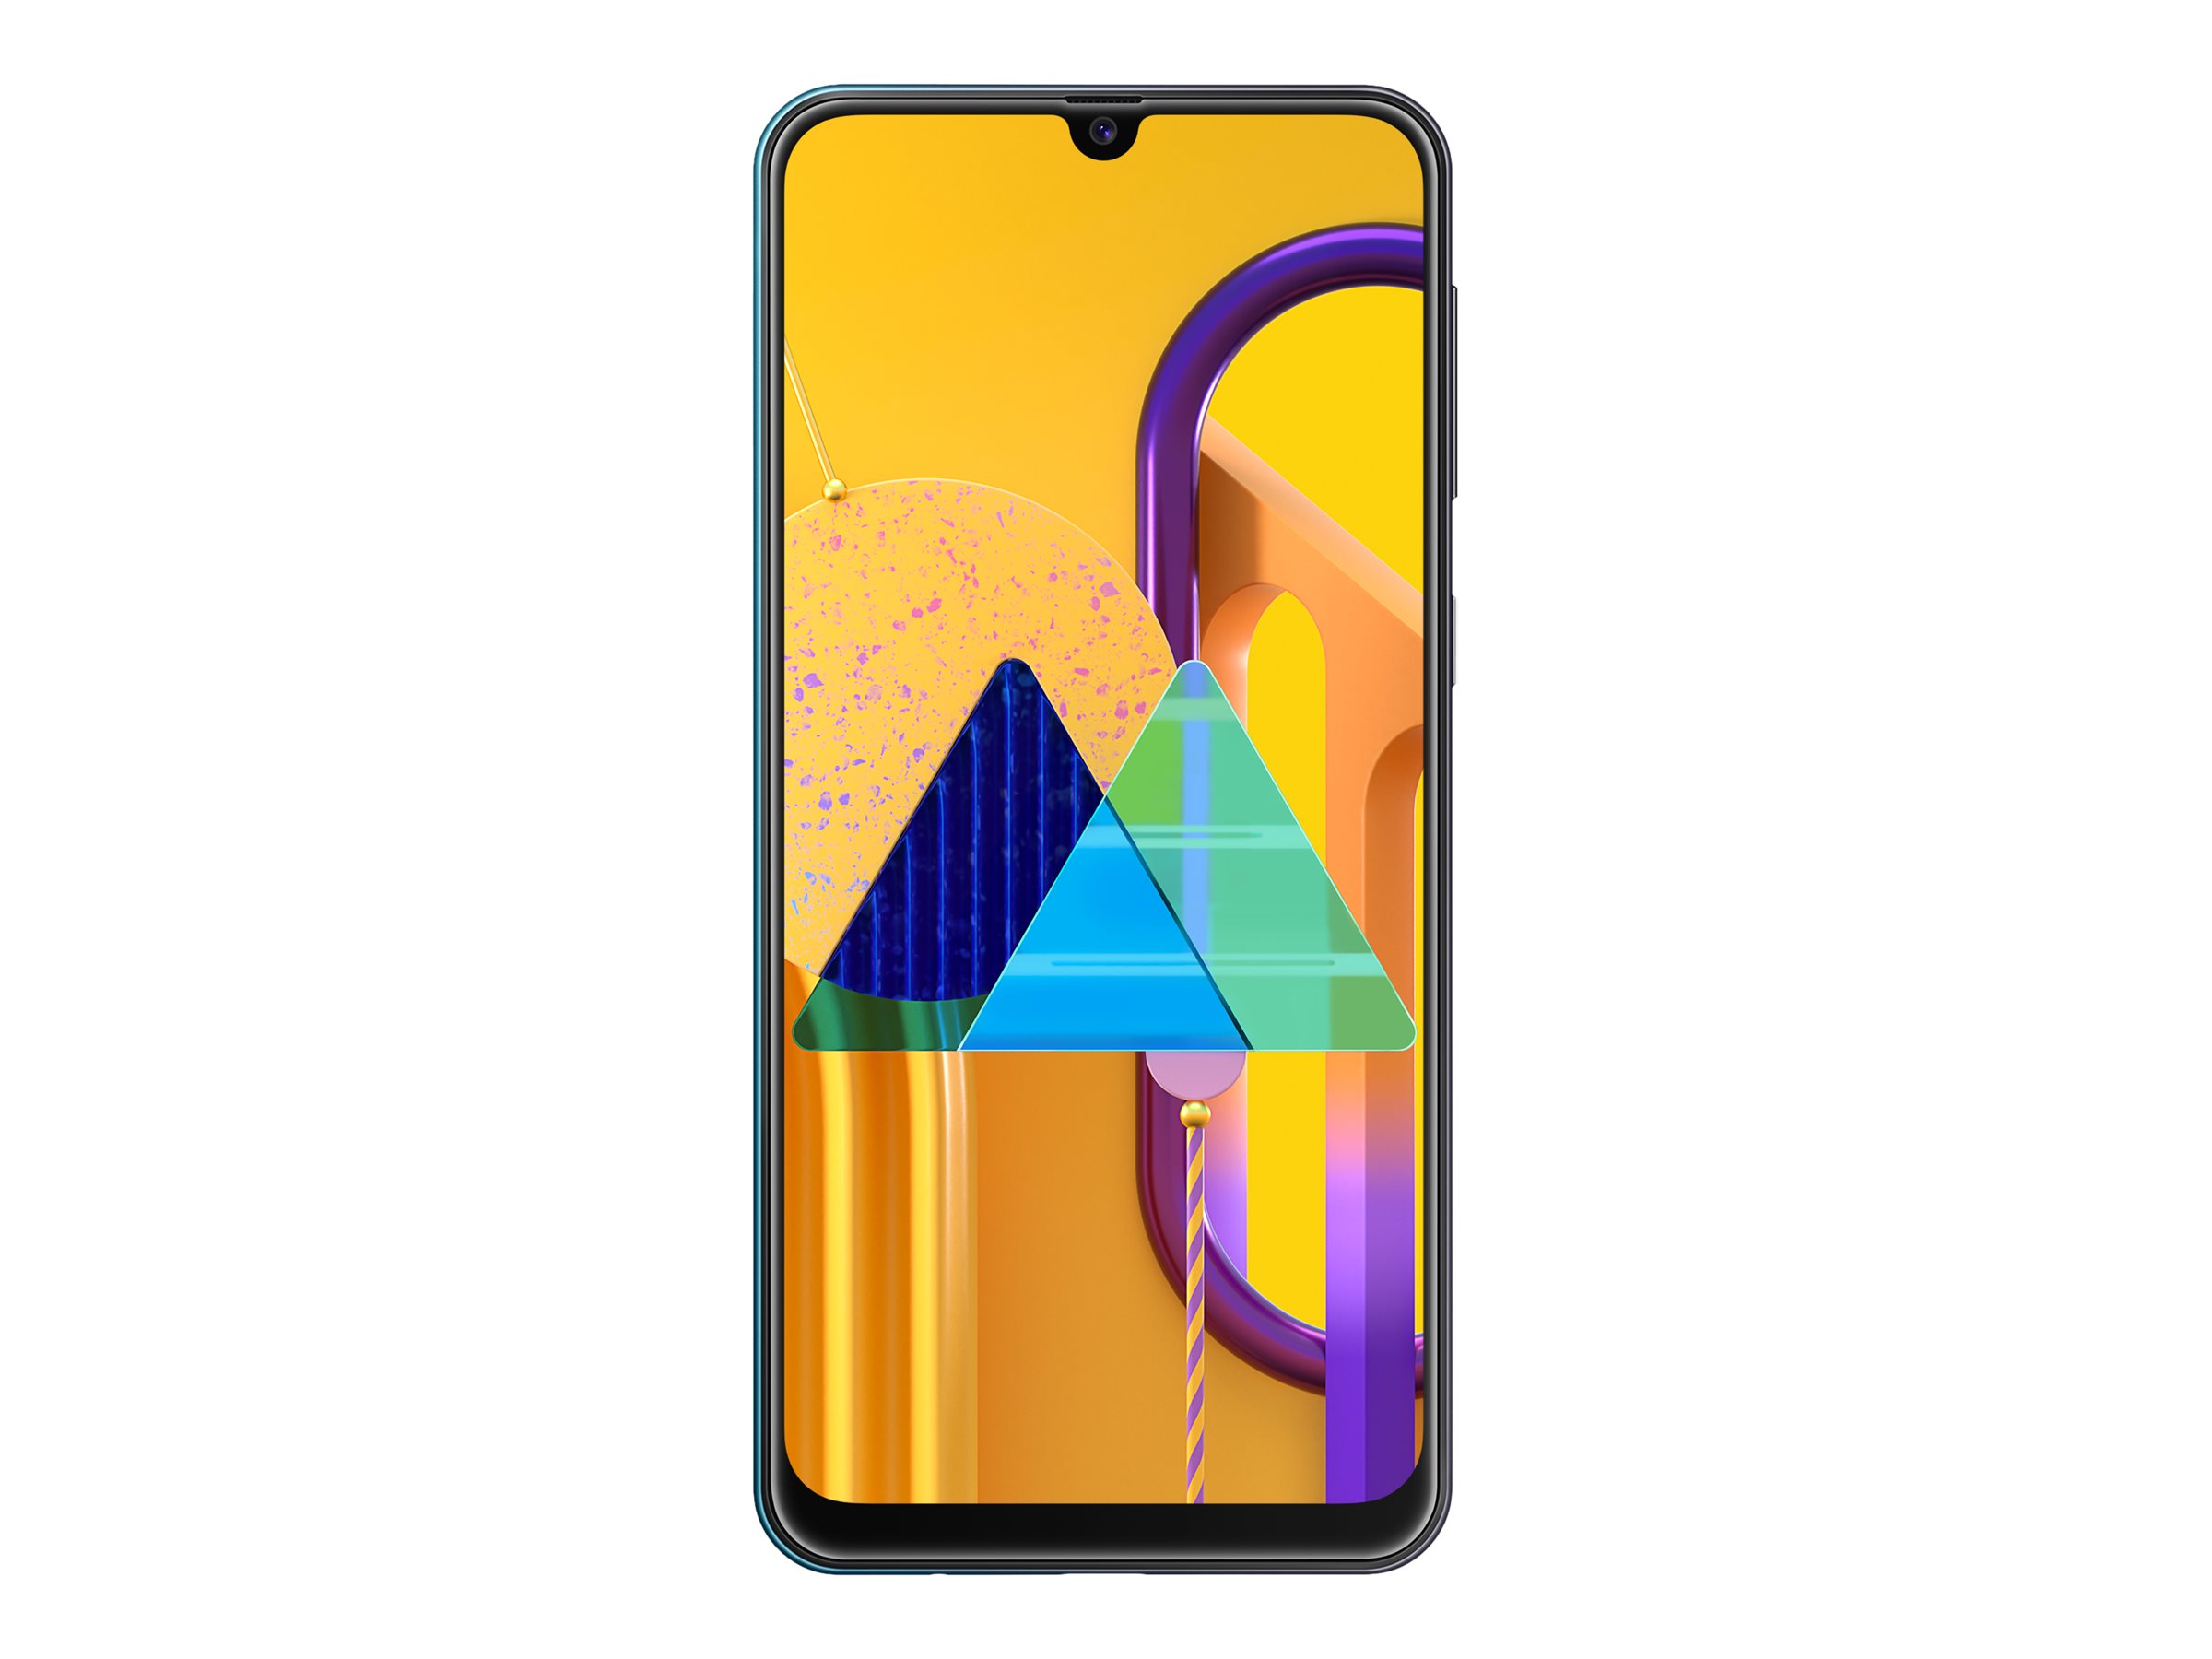 Huawei P40 Pro - Specifications